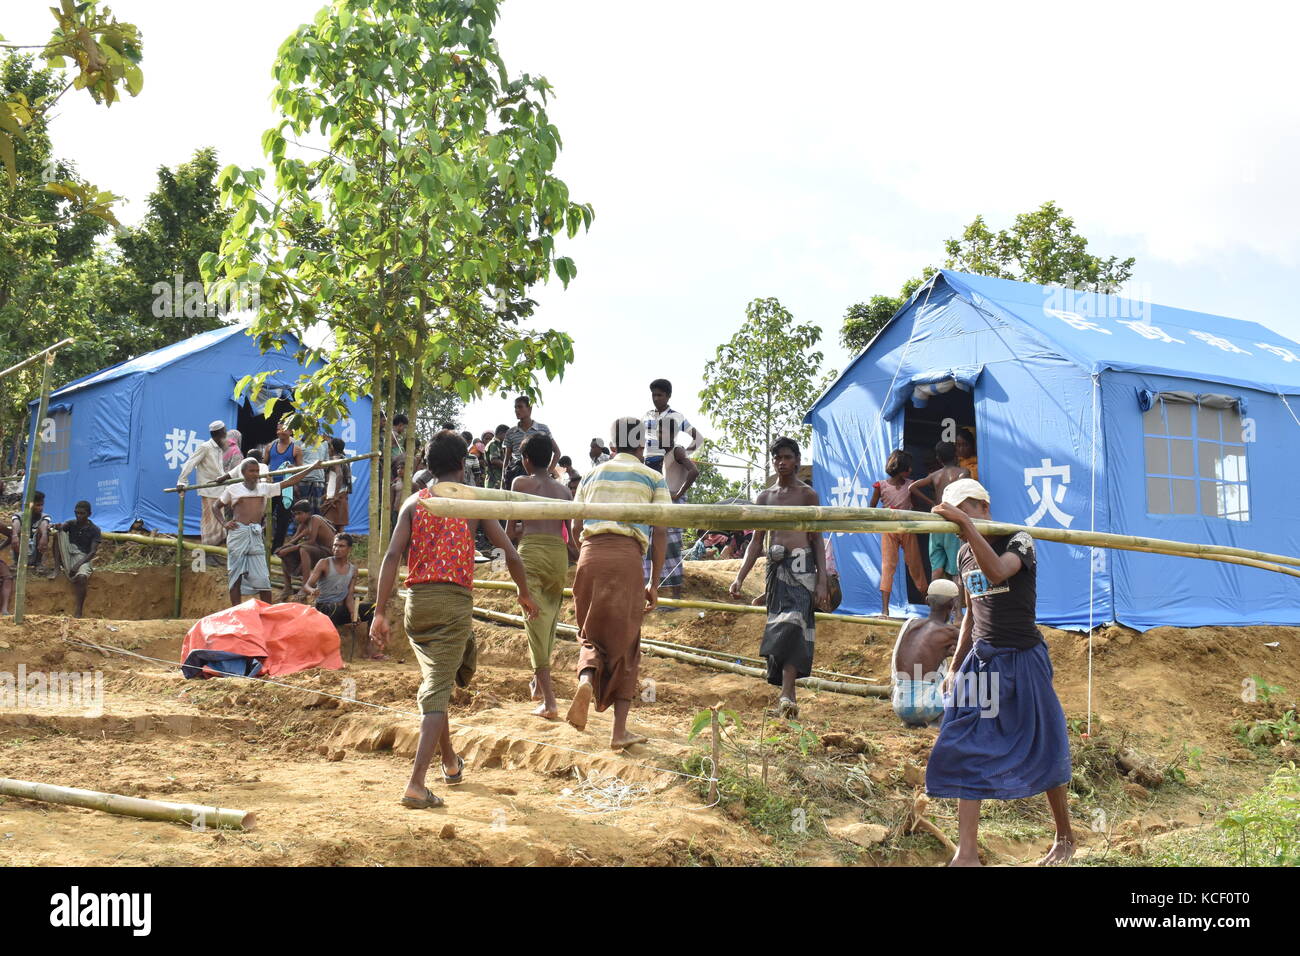 (171004) -- DHAKA, Oct. 4, 2017 (Xinhua) -- People walk near Chinese relief tents at a camp in Cox's Bazaar district, Bangladesh, on Oct. 3, 2017. China has sent relief supplies for Rohingya refugees in Bangladesh recently. (Xinhua/Jibon Ahsan) (zcc) Stock Photo